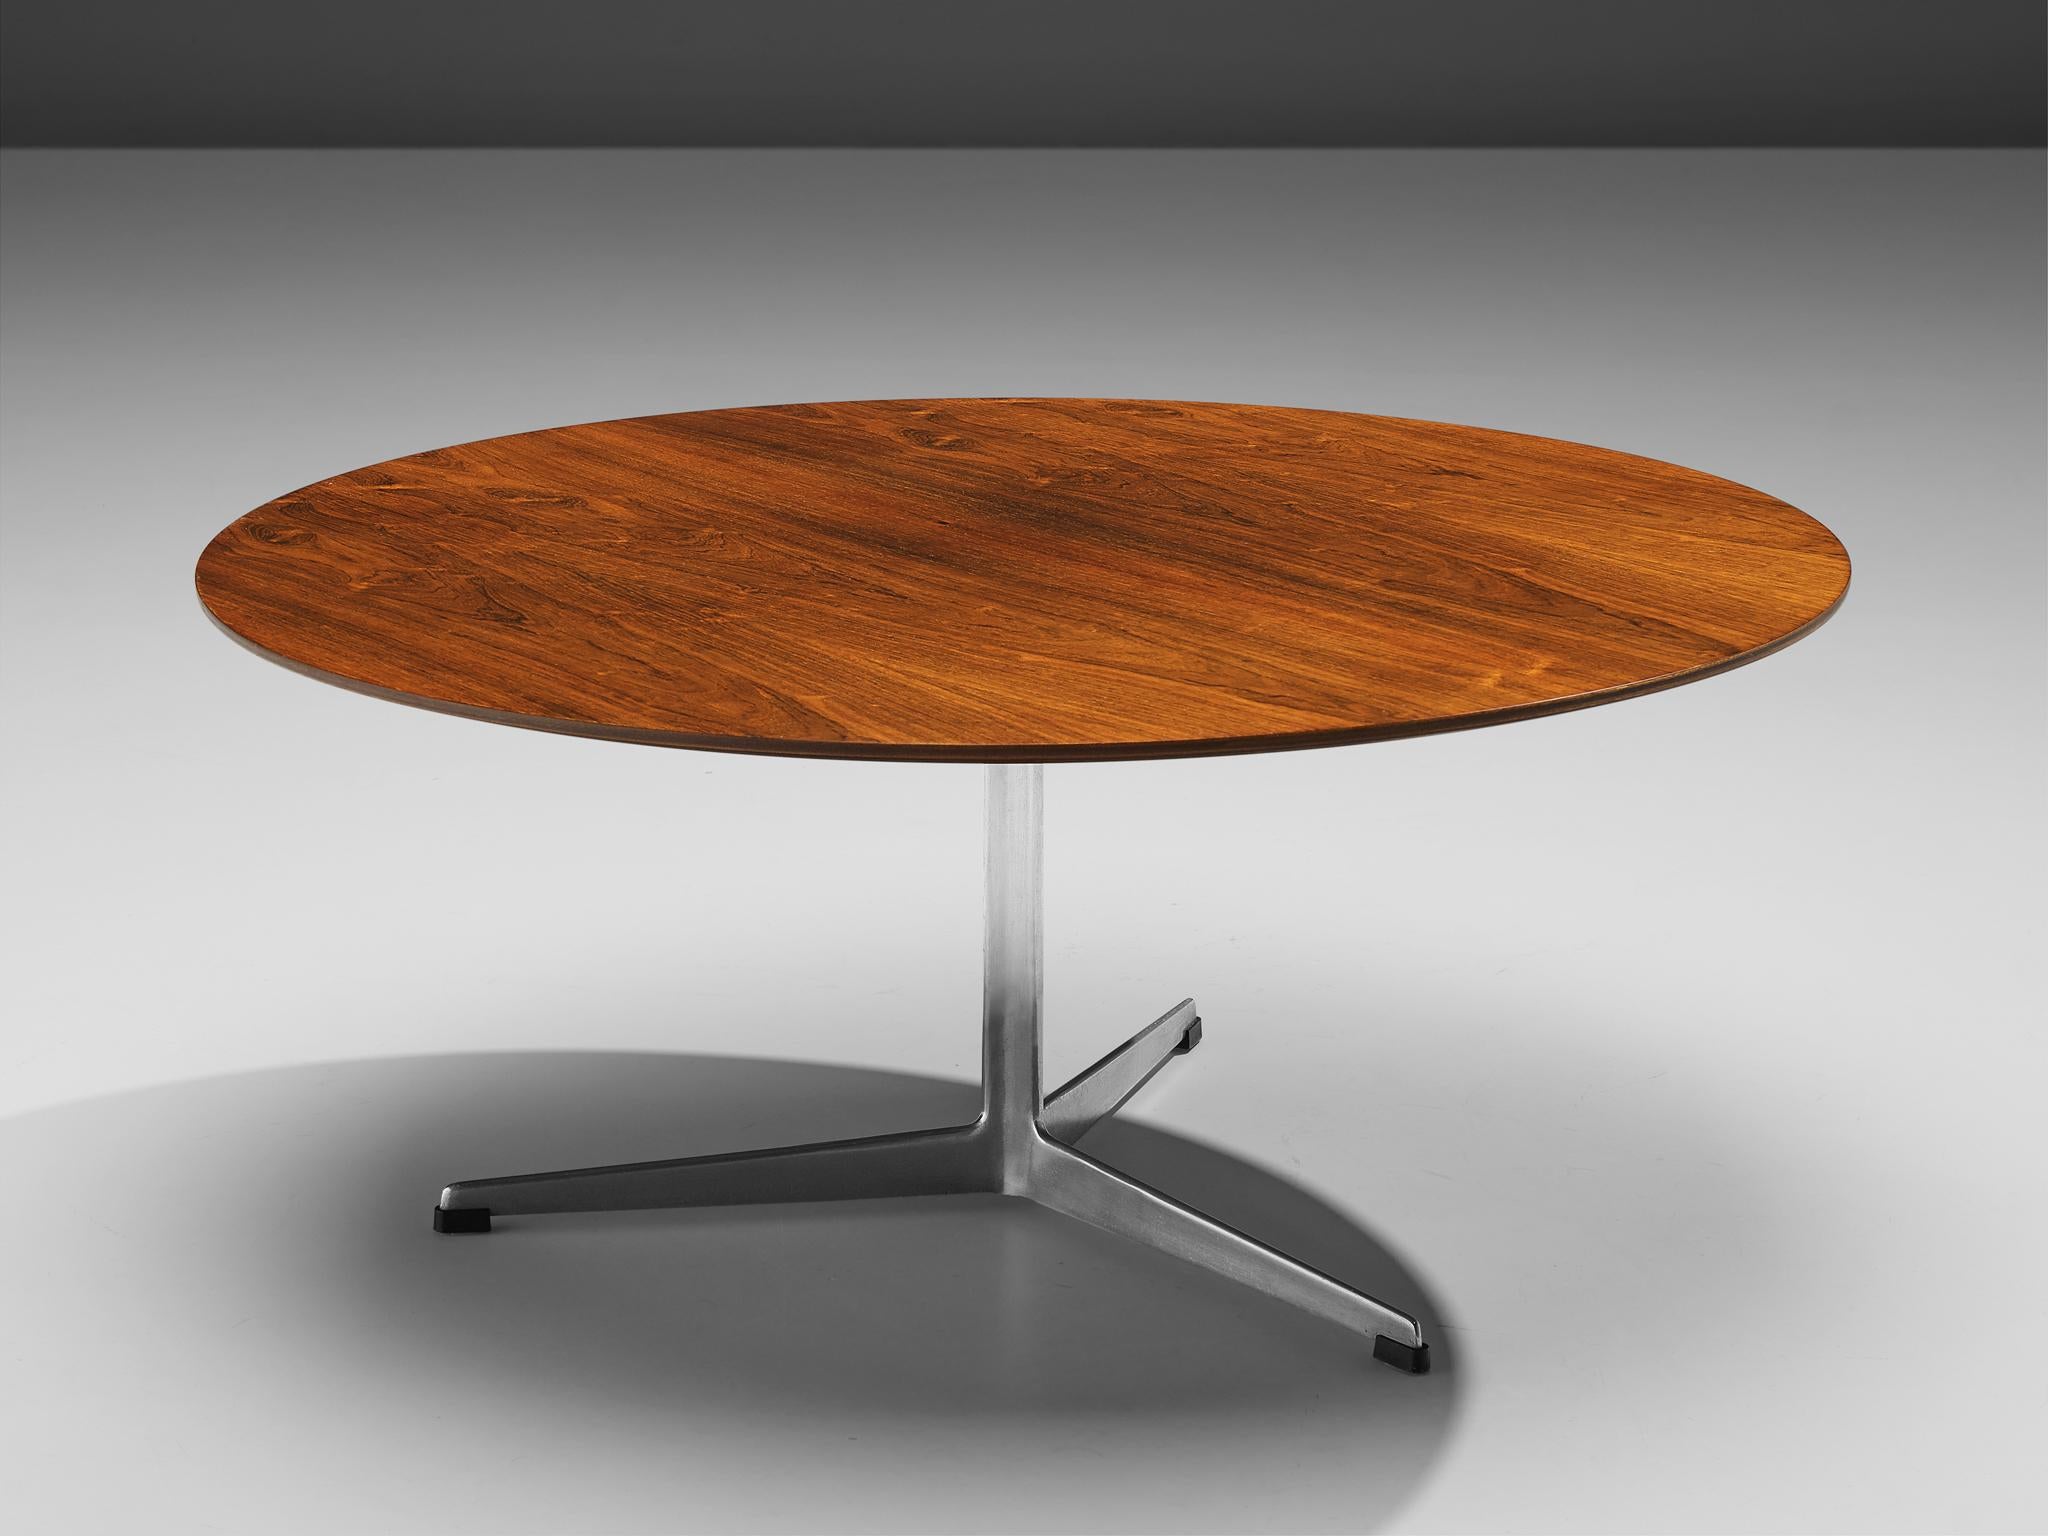 Arne Jacobsen for Fritz Hansen, coffee table, rosewood, metal, Denmark, 1950s

Pedestal coffee table with round top by Arne Jacobsen for Fritz Hansen. The circular wooden top with expressive grain rests on a pedestal base in metal with a three-star